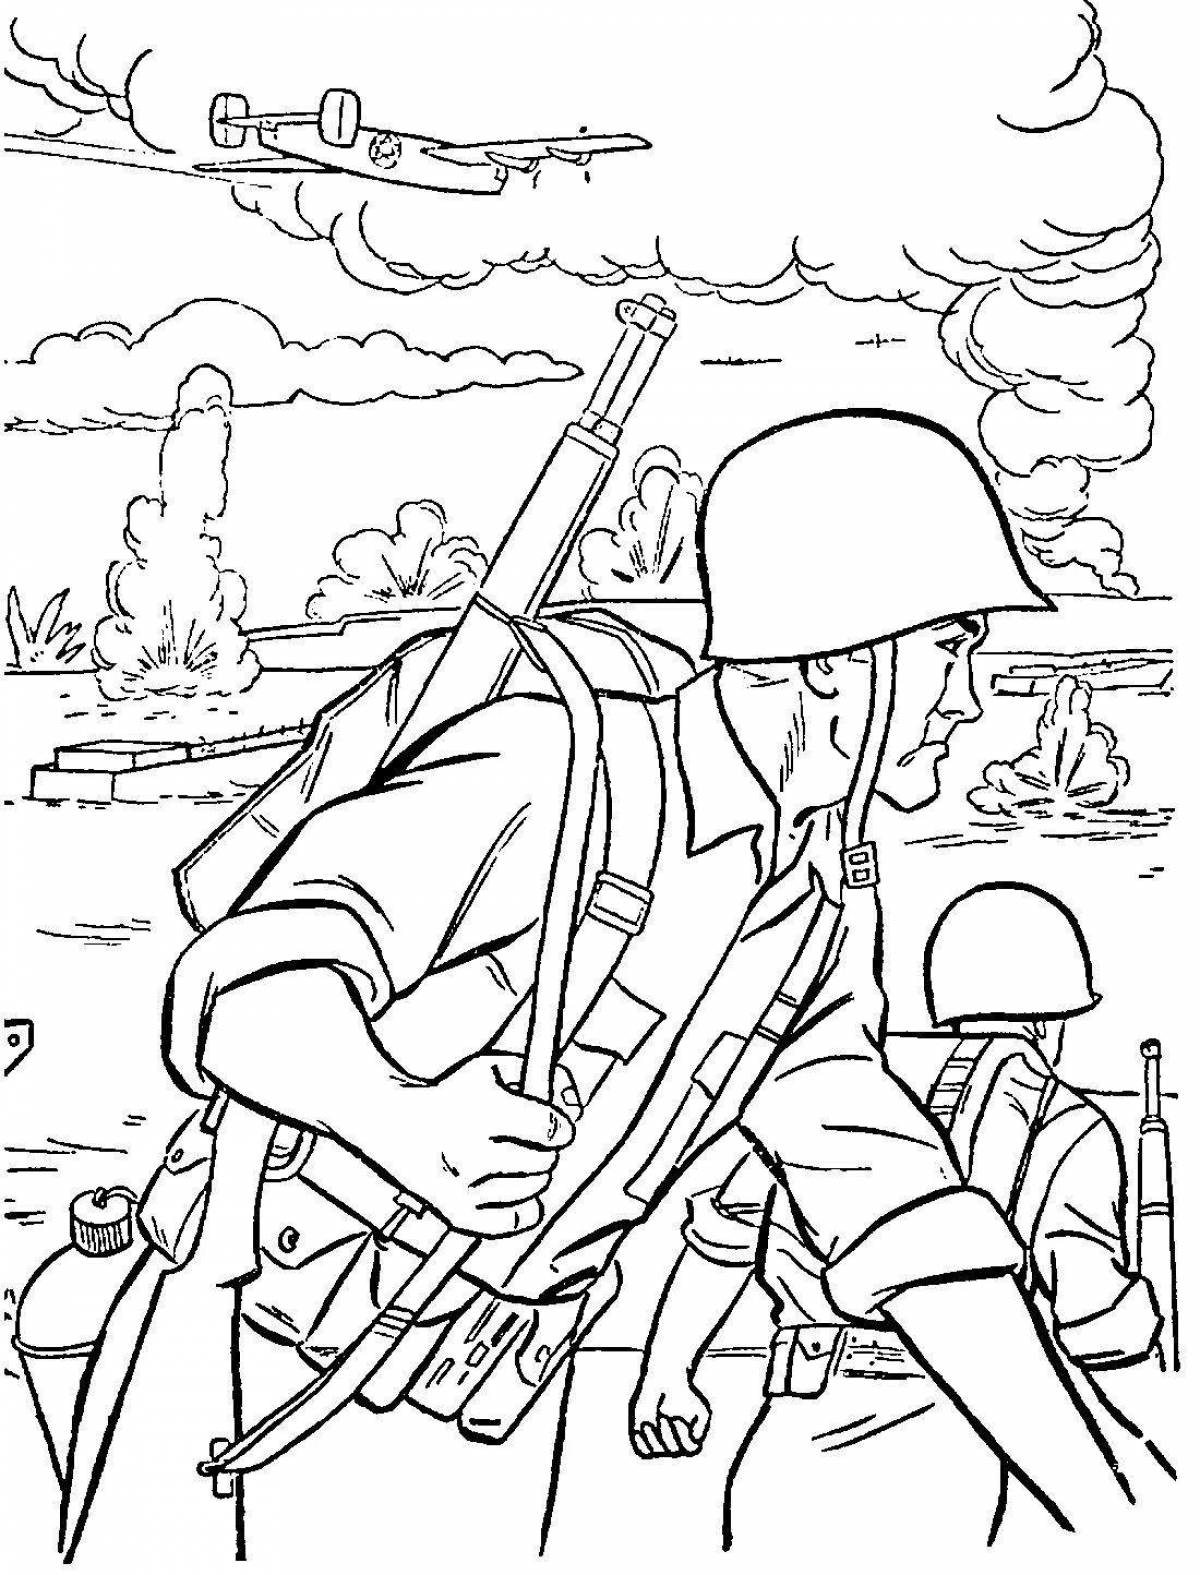 Bright soldier and children's coloring